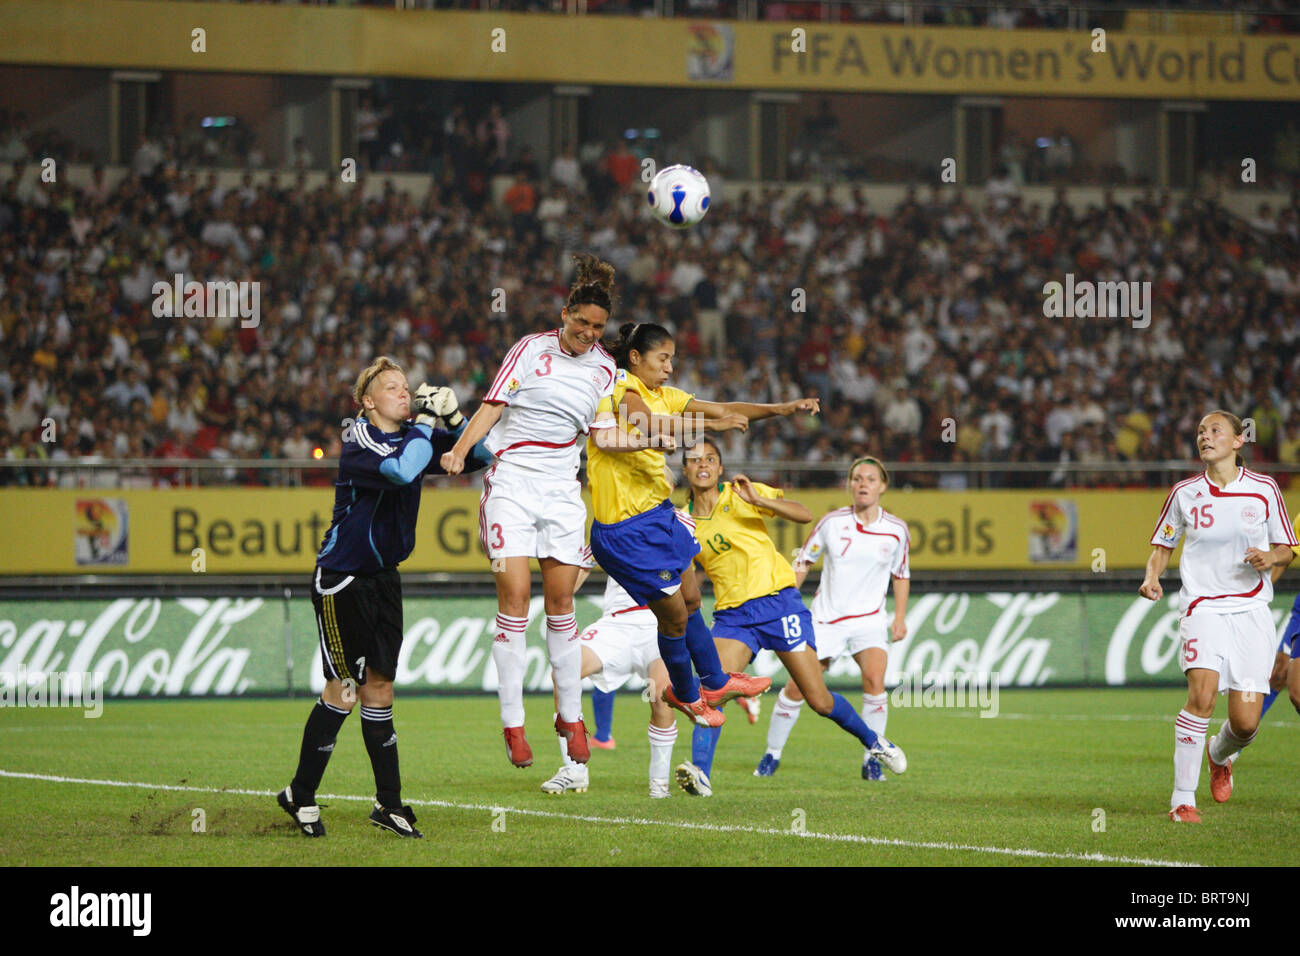 Katrine Pedersen of Denmark (3) and Cristiane of Brazil (r) fight for a header during a 2007 Women's World Cup match. Stock Photo